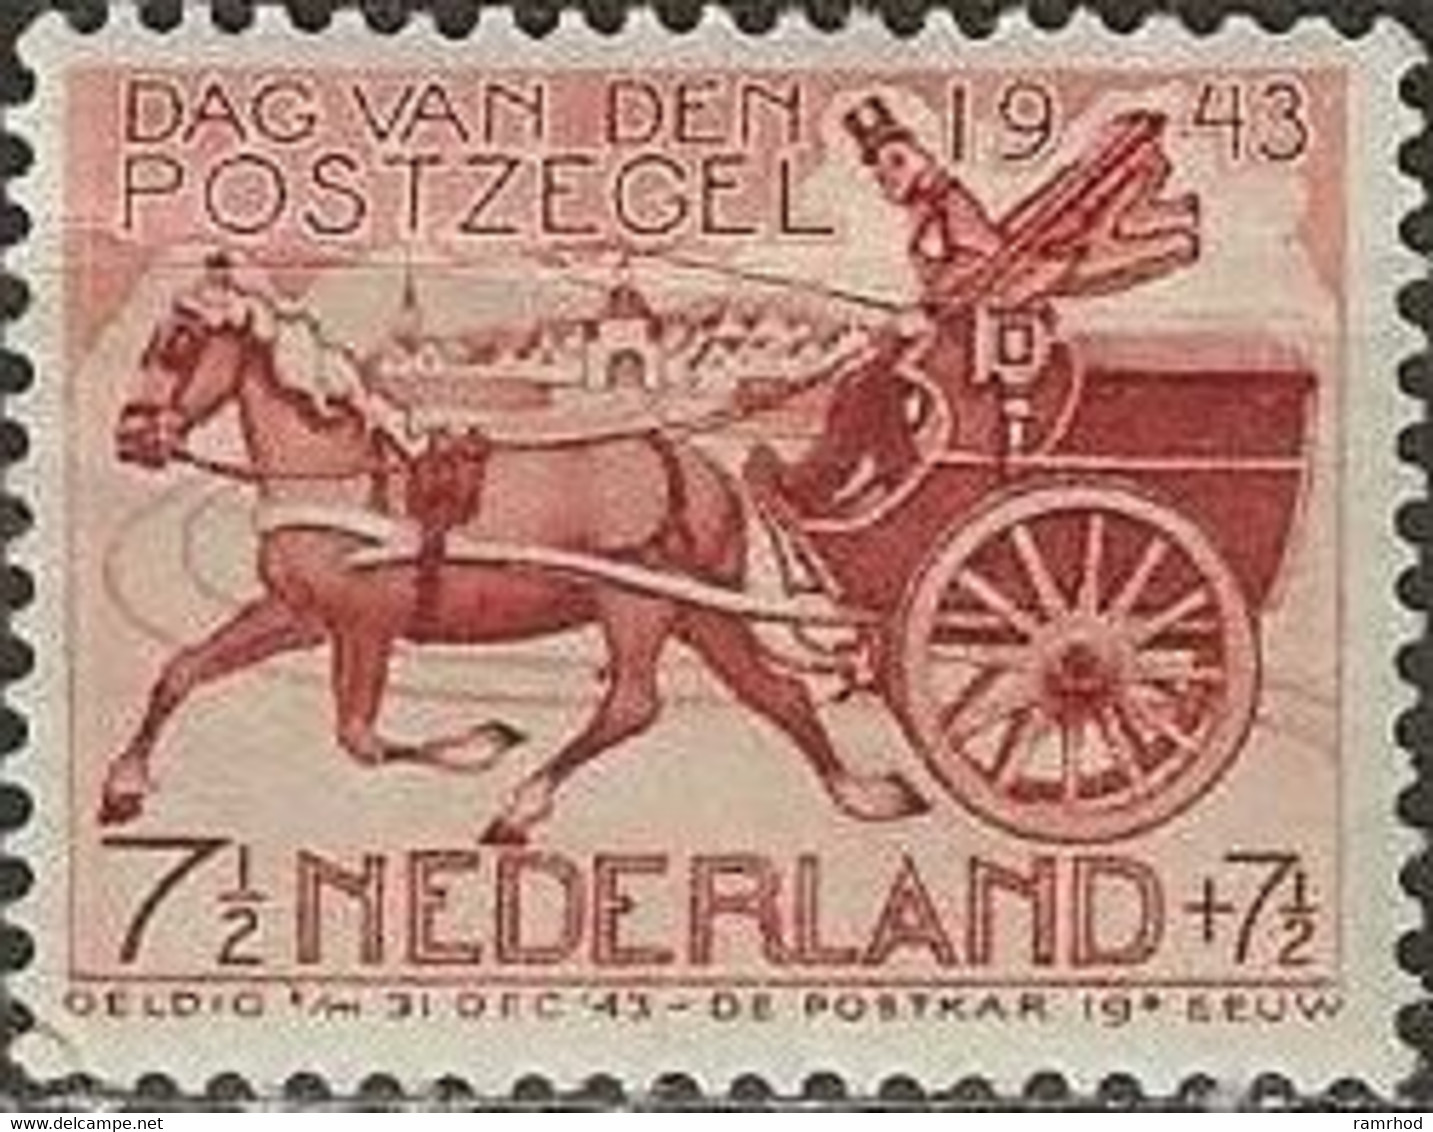 NETHERLANDS 1943 Stamp Day - 71/2c.+71/2c Mail Cart MH - Neufs